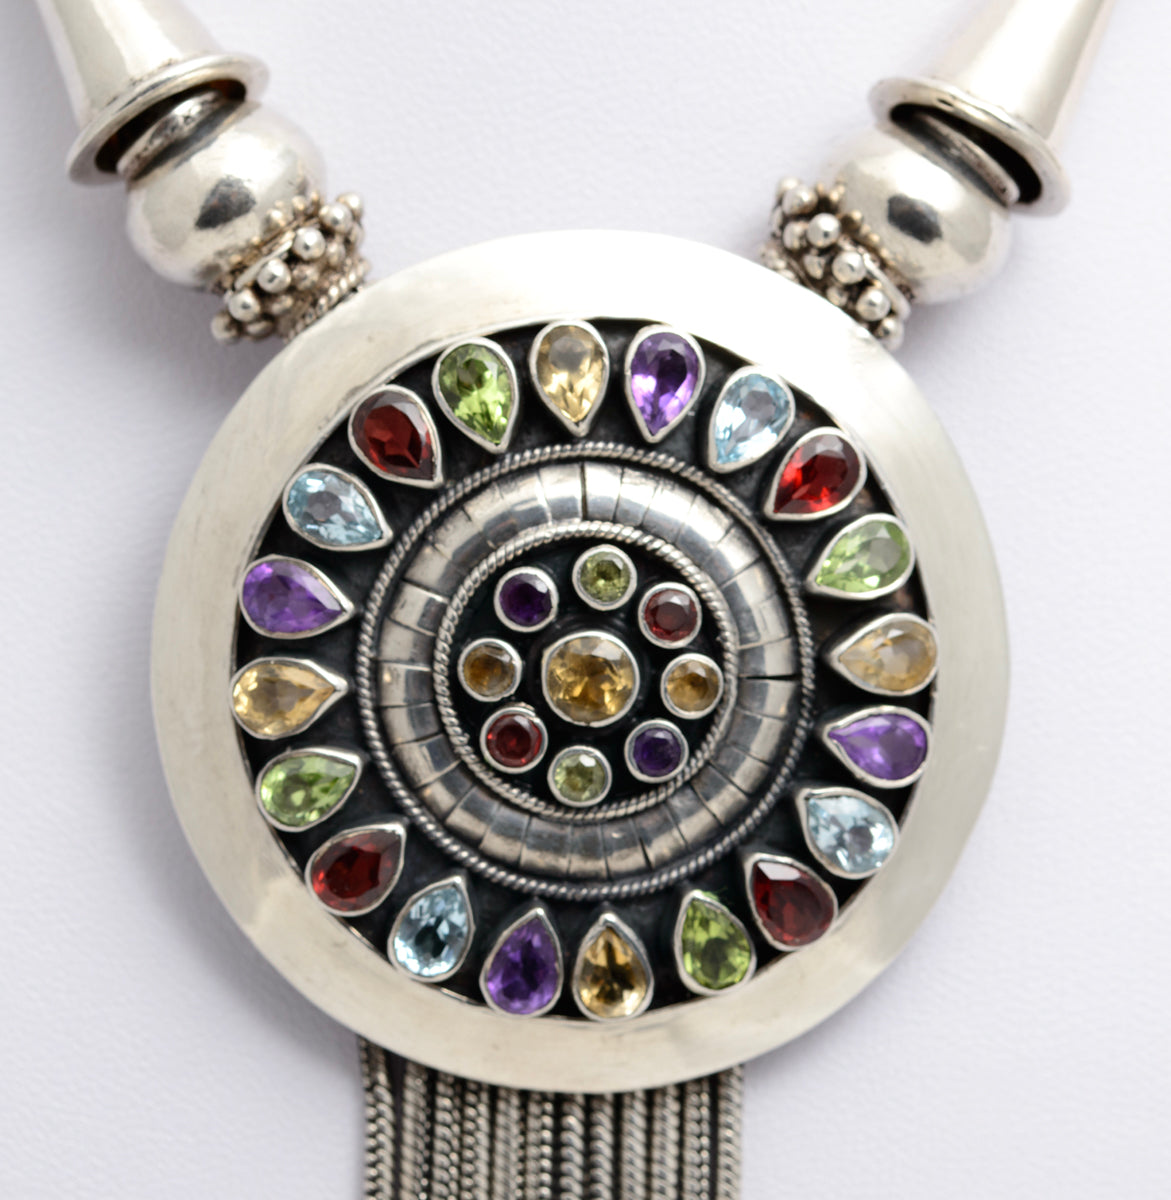 Vintage Sterling Silver Statement Necklace With Multi Natural Gemstones Inc. Citrine, Amethyst, Garnet, Topaz, Peridot c.1970's  (A1476)